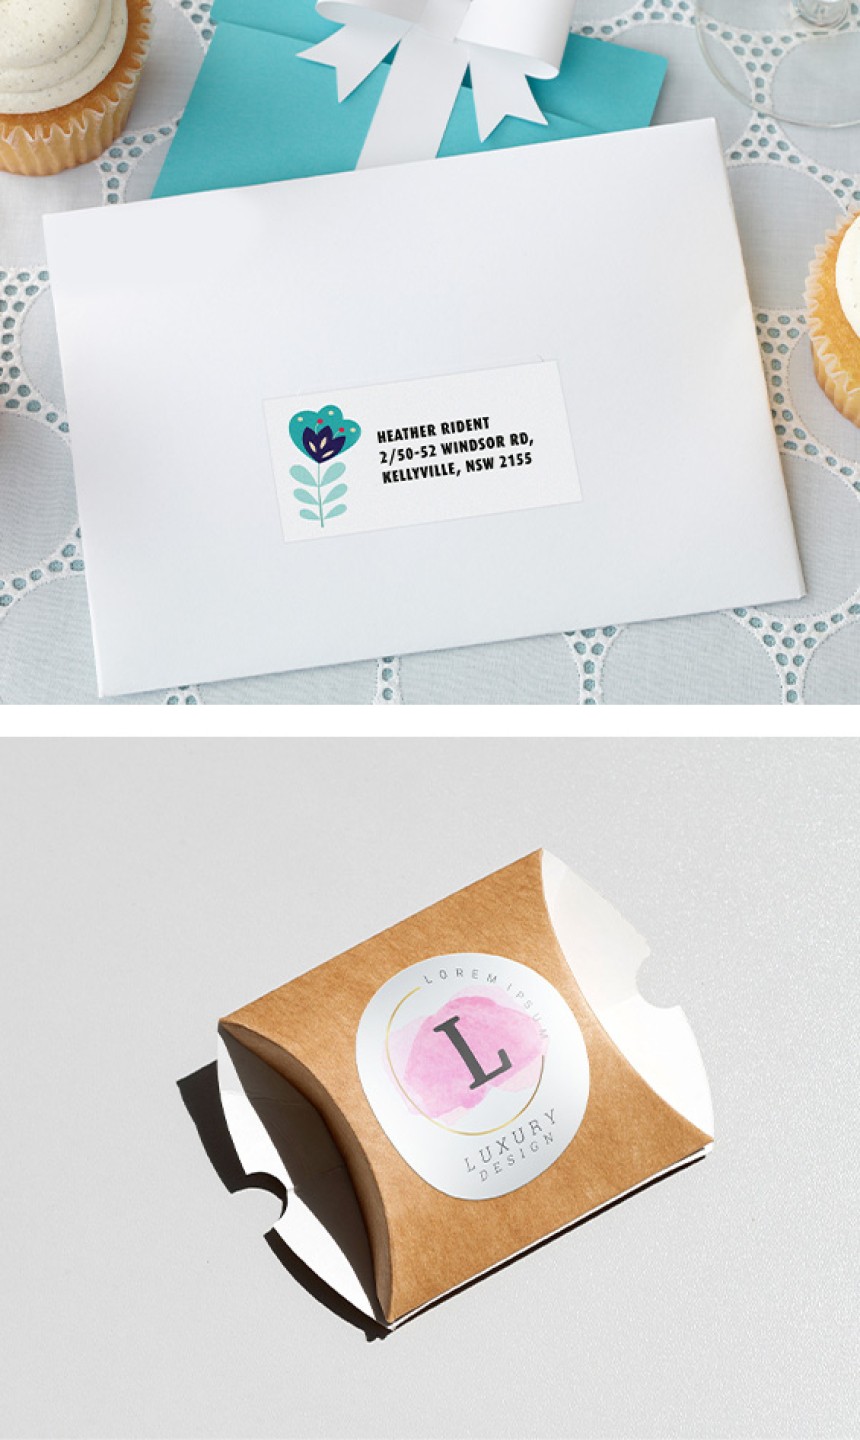 Top shot: Decorative envelope with stylised label on the front. Bottom shot: Small kraft brown pack with round label